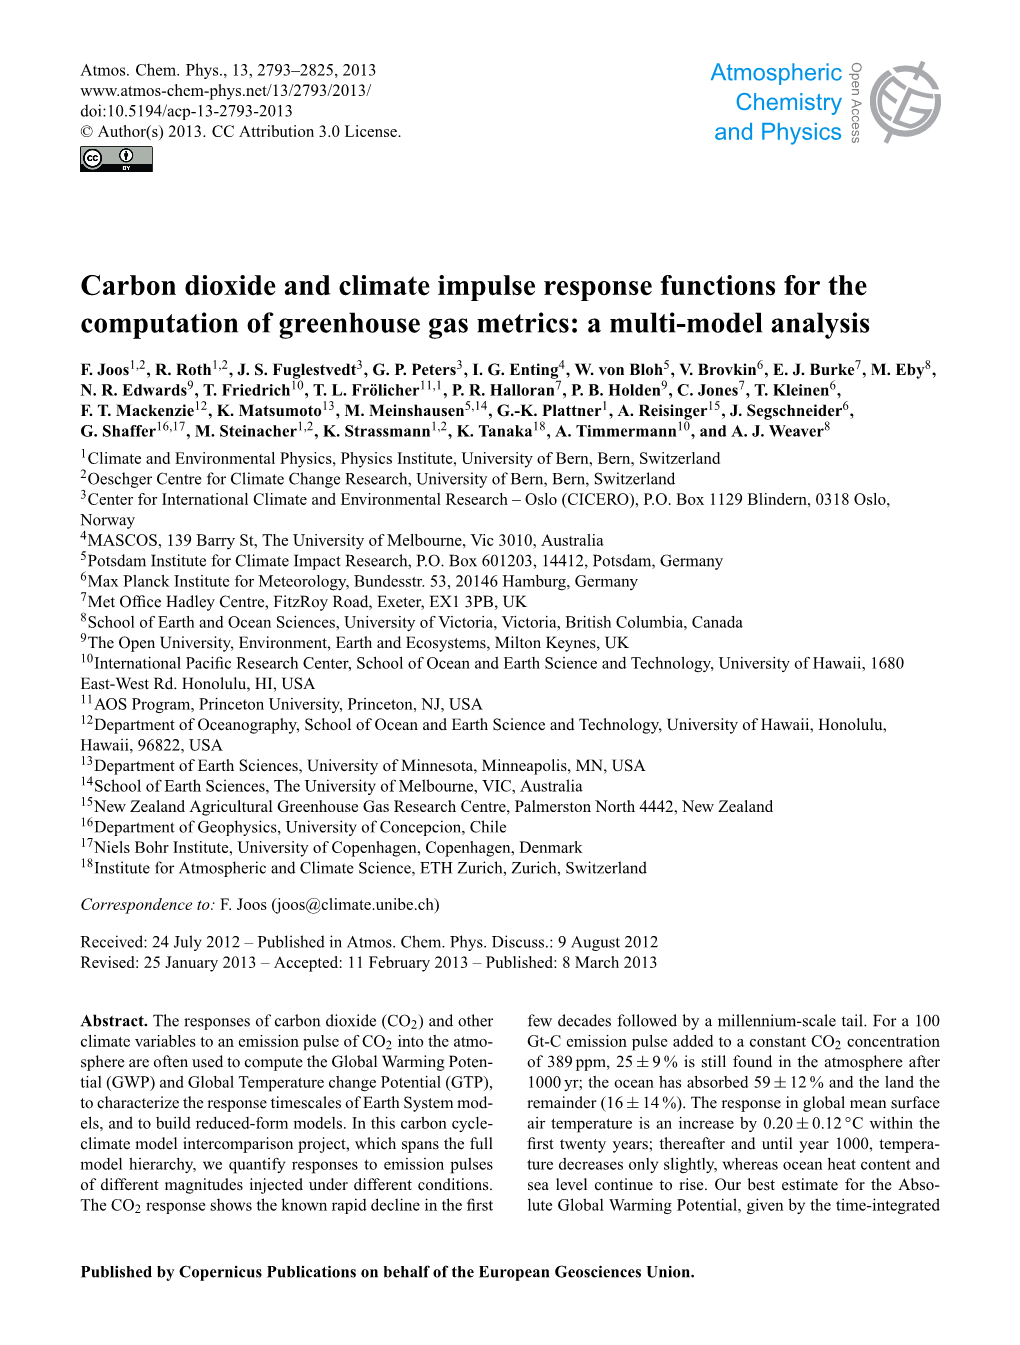 Carbon Dioxide and Climate Impulse Response Functions